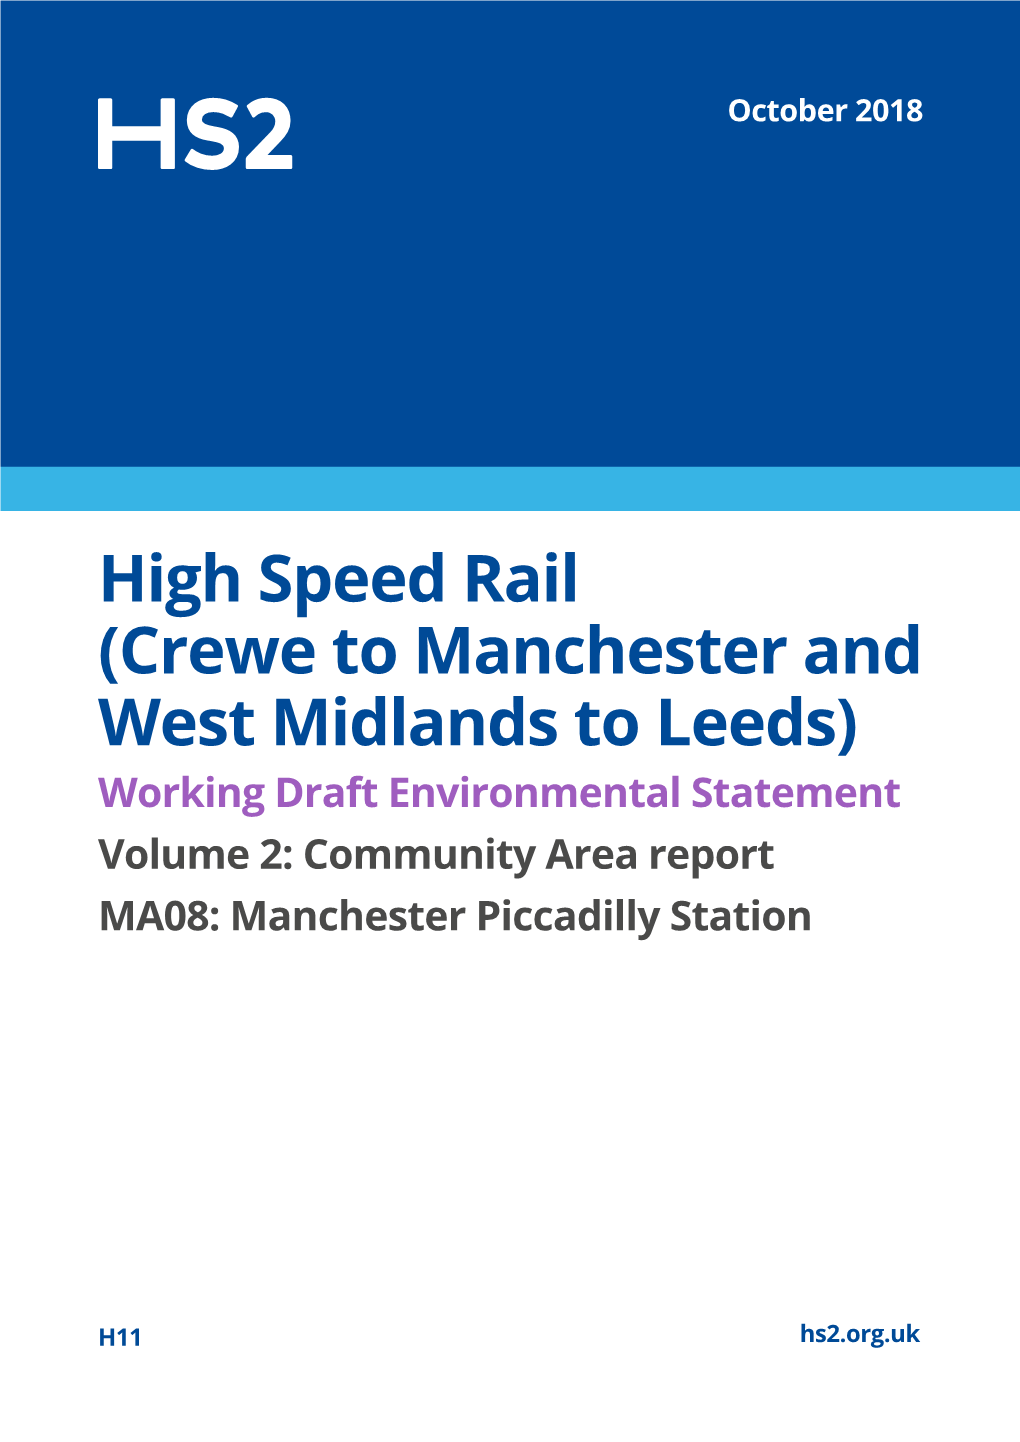 Crewe to Manchester and West Midlands to Leeds) Working Draft Environmental Statement Volume 2: Community Area Report MA08: Manchester Piccadilly Station